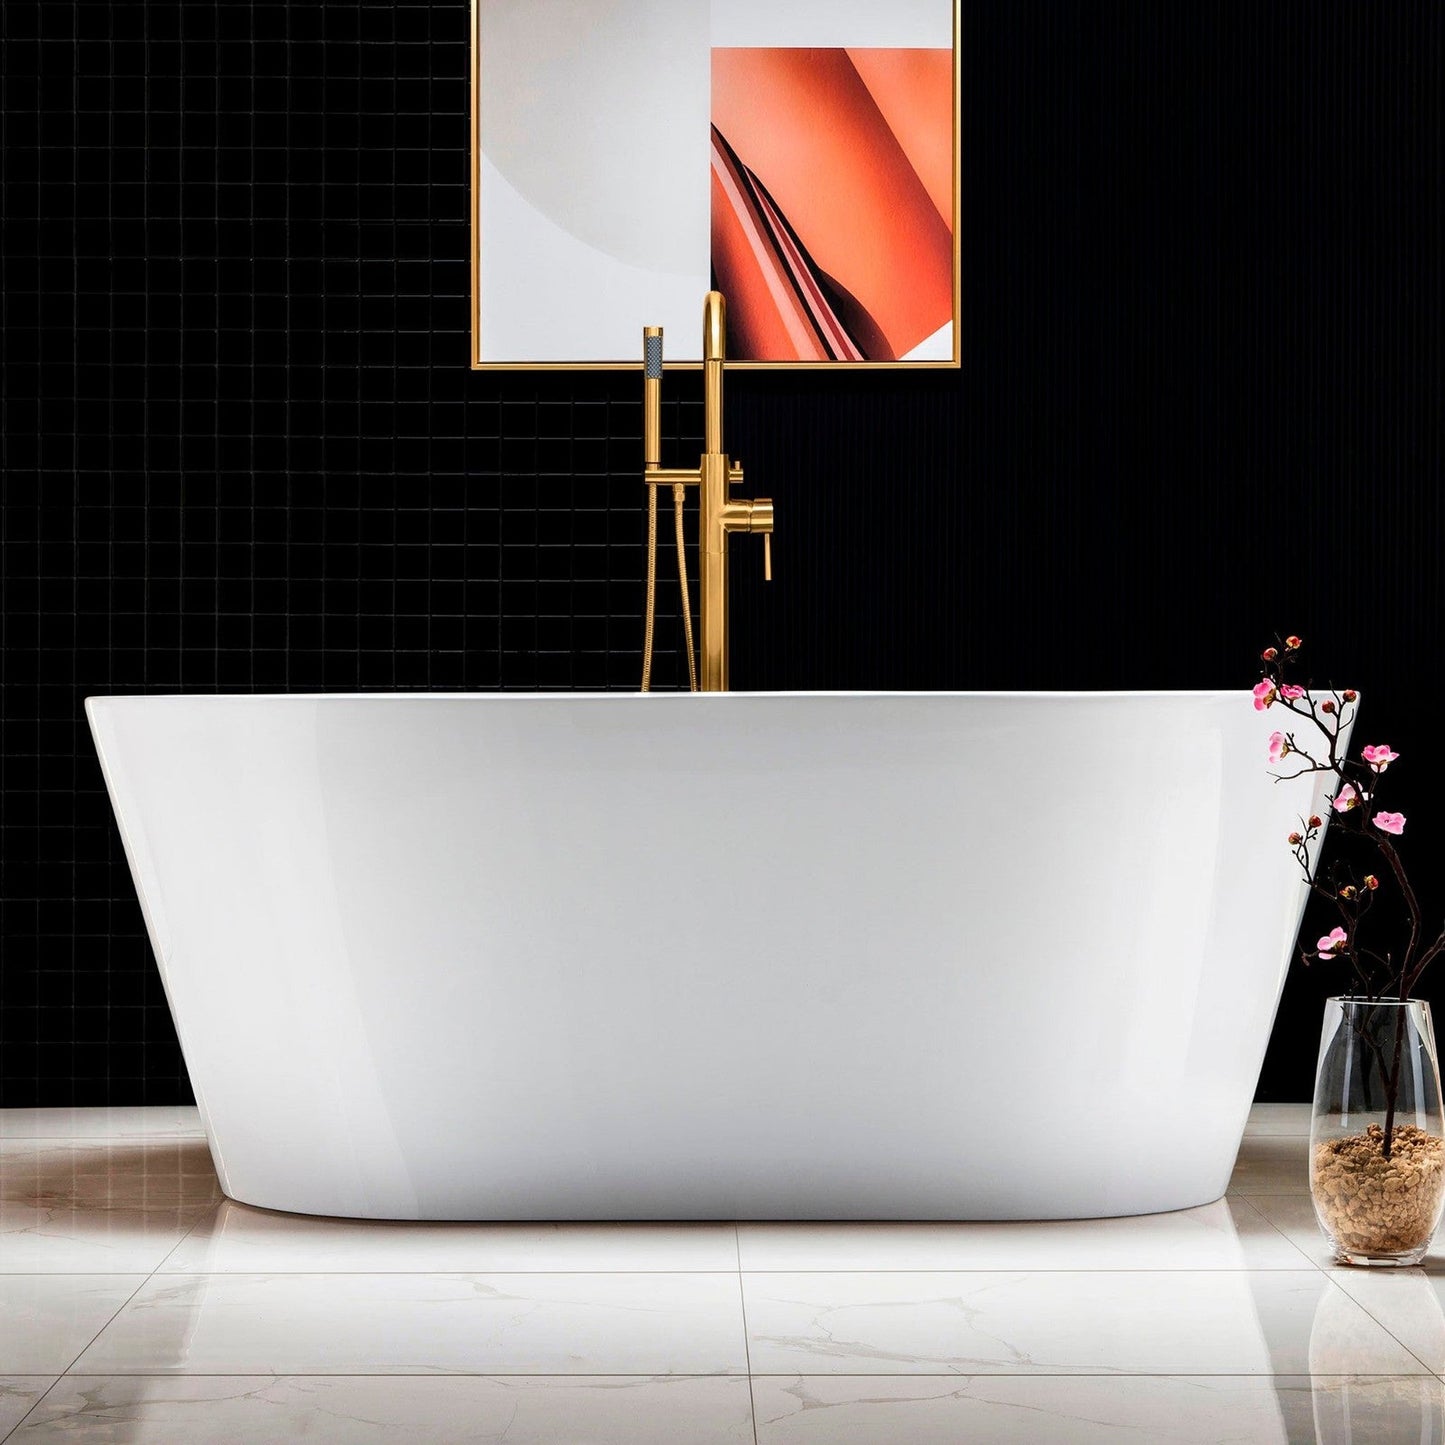 WoodBridge B0014 59" White Acrylic Freestanding Soaking Bathtub With Brushed Gold Drain, Overflow, F-0007BGVT Tub Filler and Caddy Tray